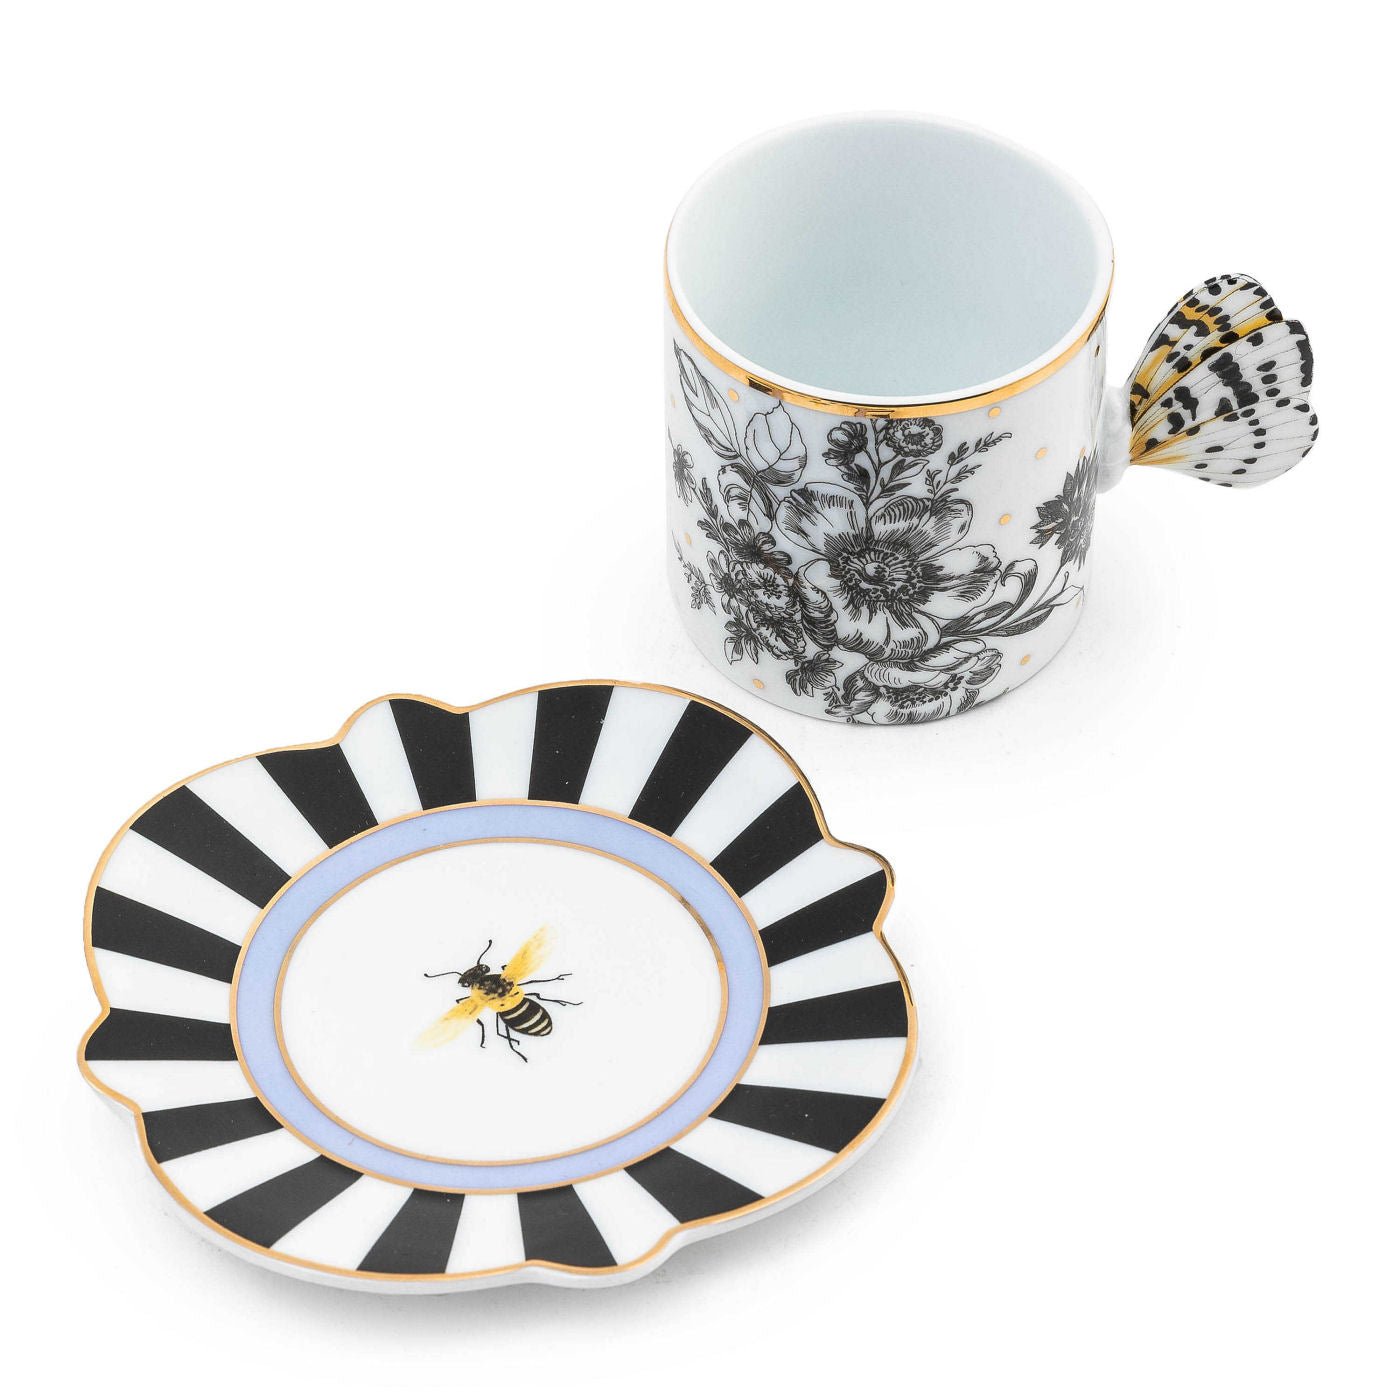 MacKenzie-Childs Butterfly Toile Mug & Saucer Set - |VESIMI Design| Luxury Bathrooms and Home Decor